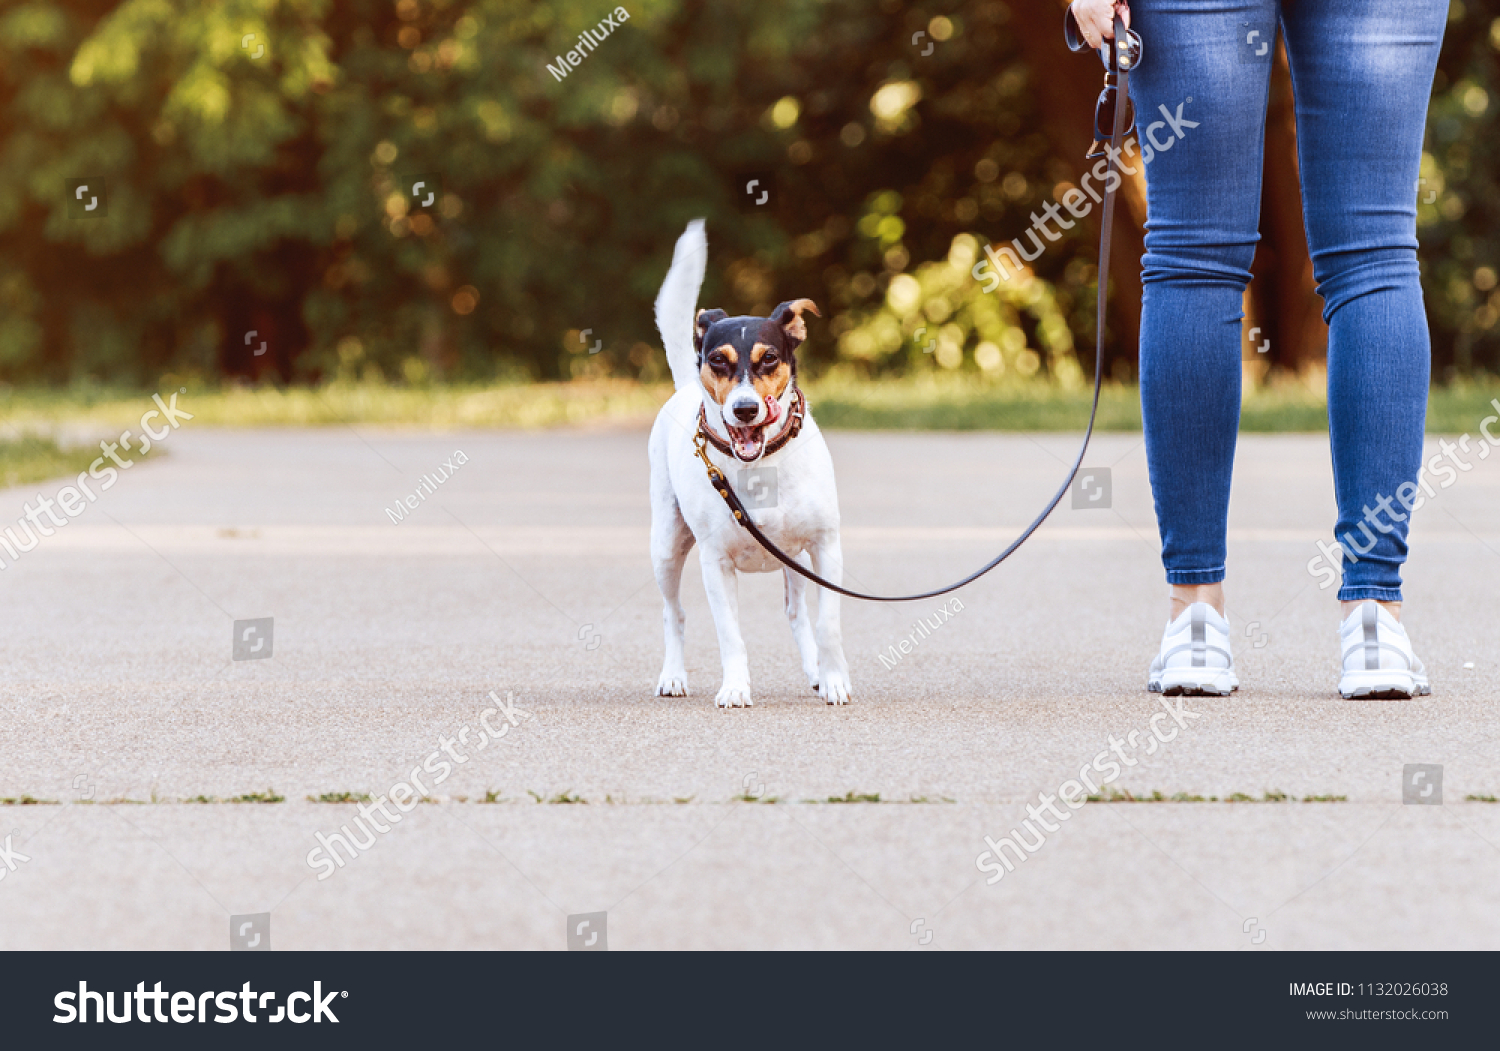 Jack Russel Terrier Running Near Her People Stock Image 1132026038